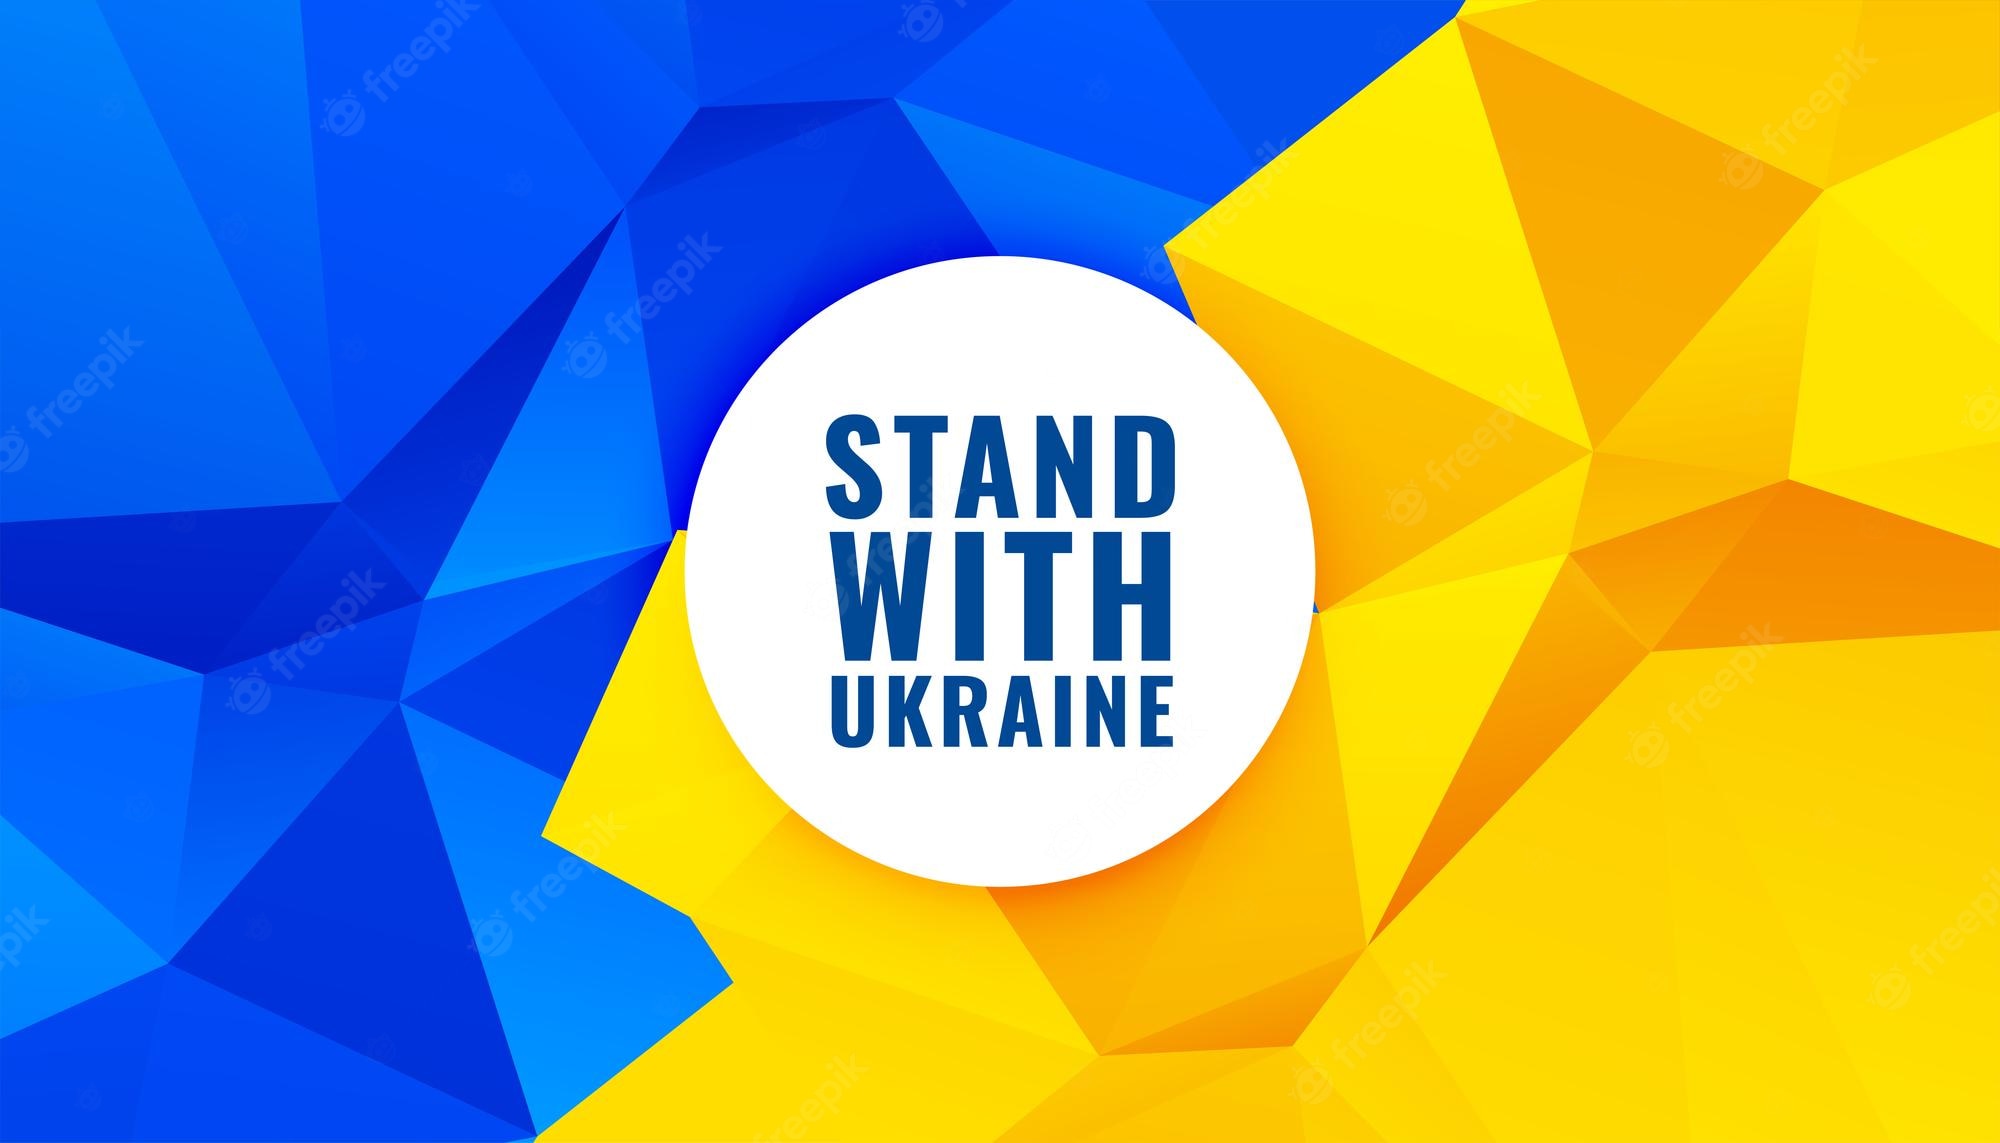 Stand With Ukraine Image. Free Vectors, & PSD